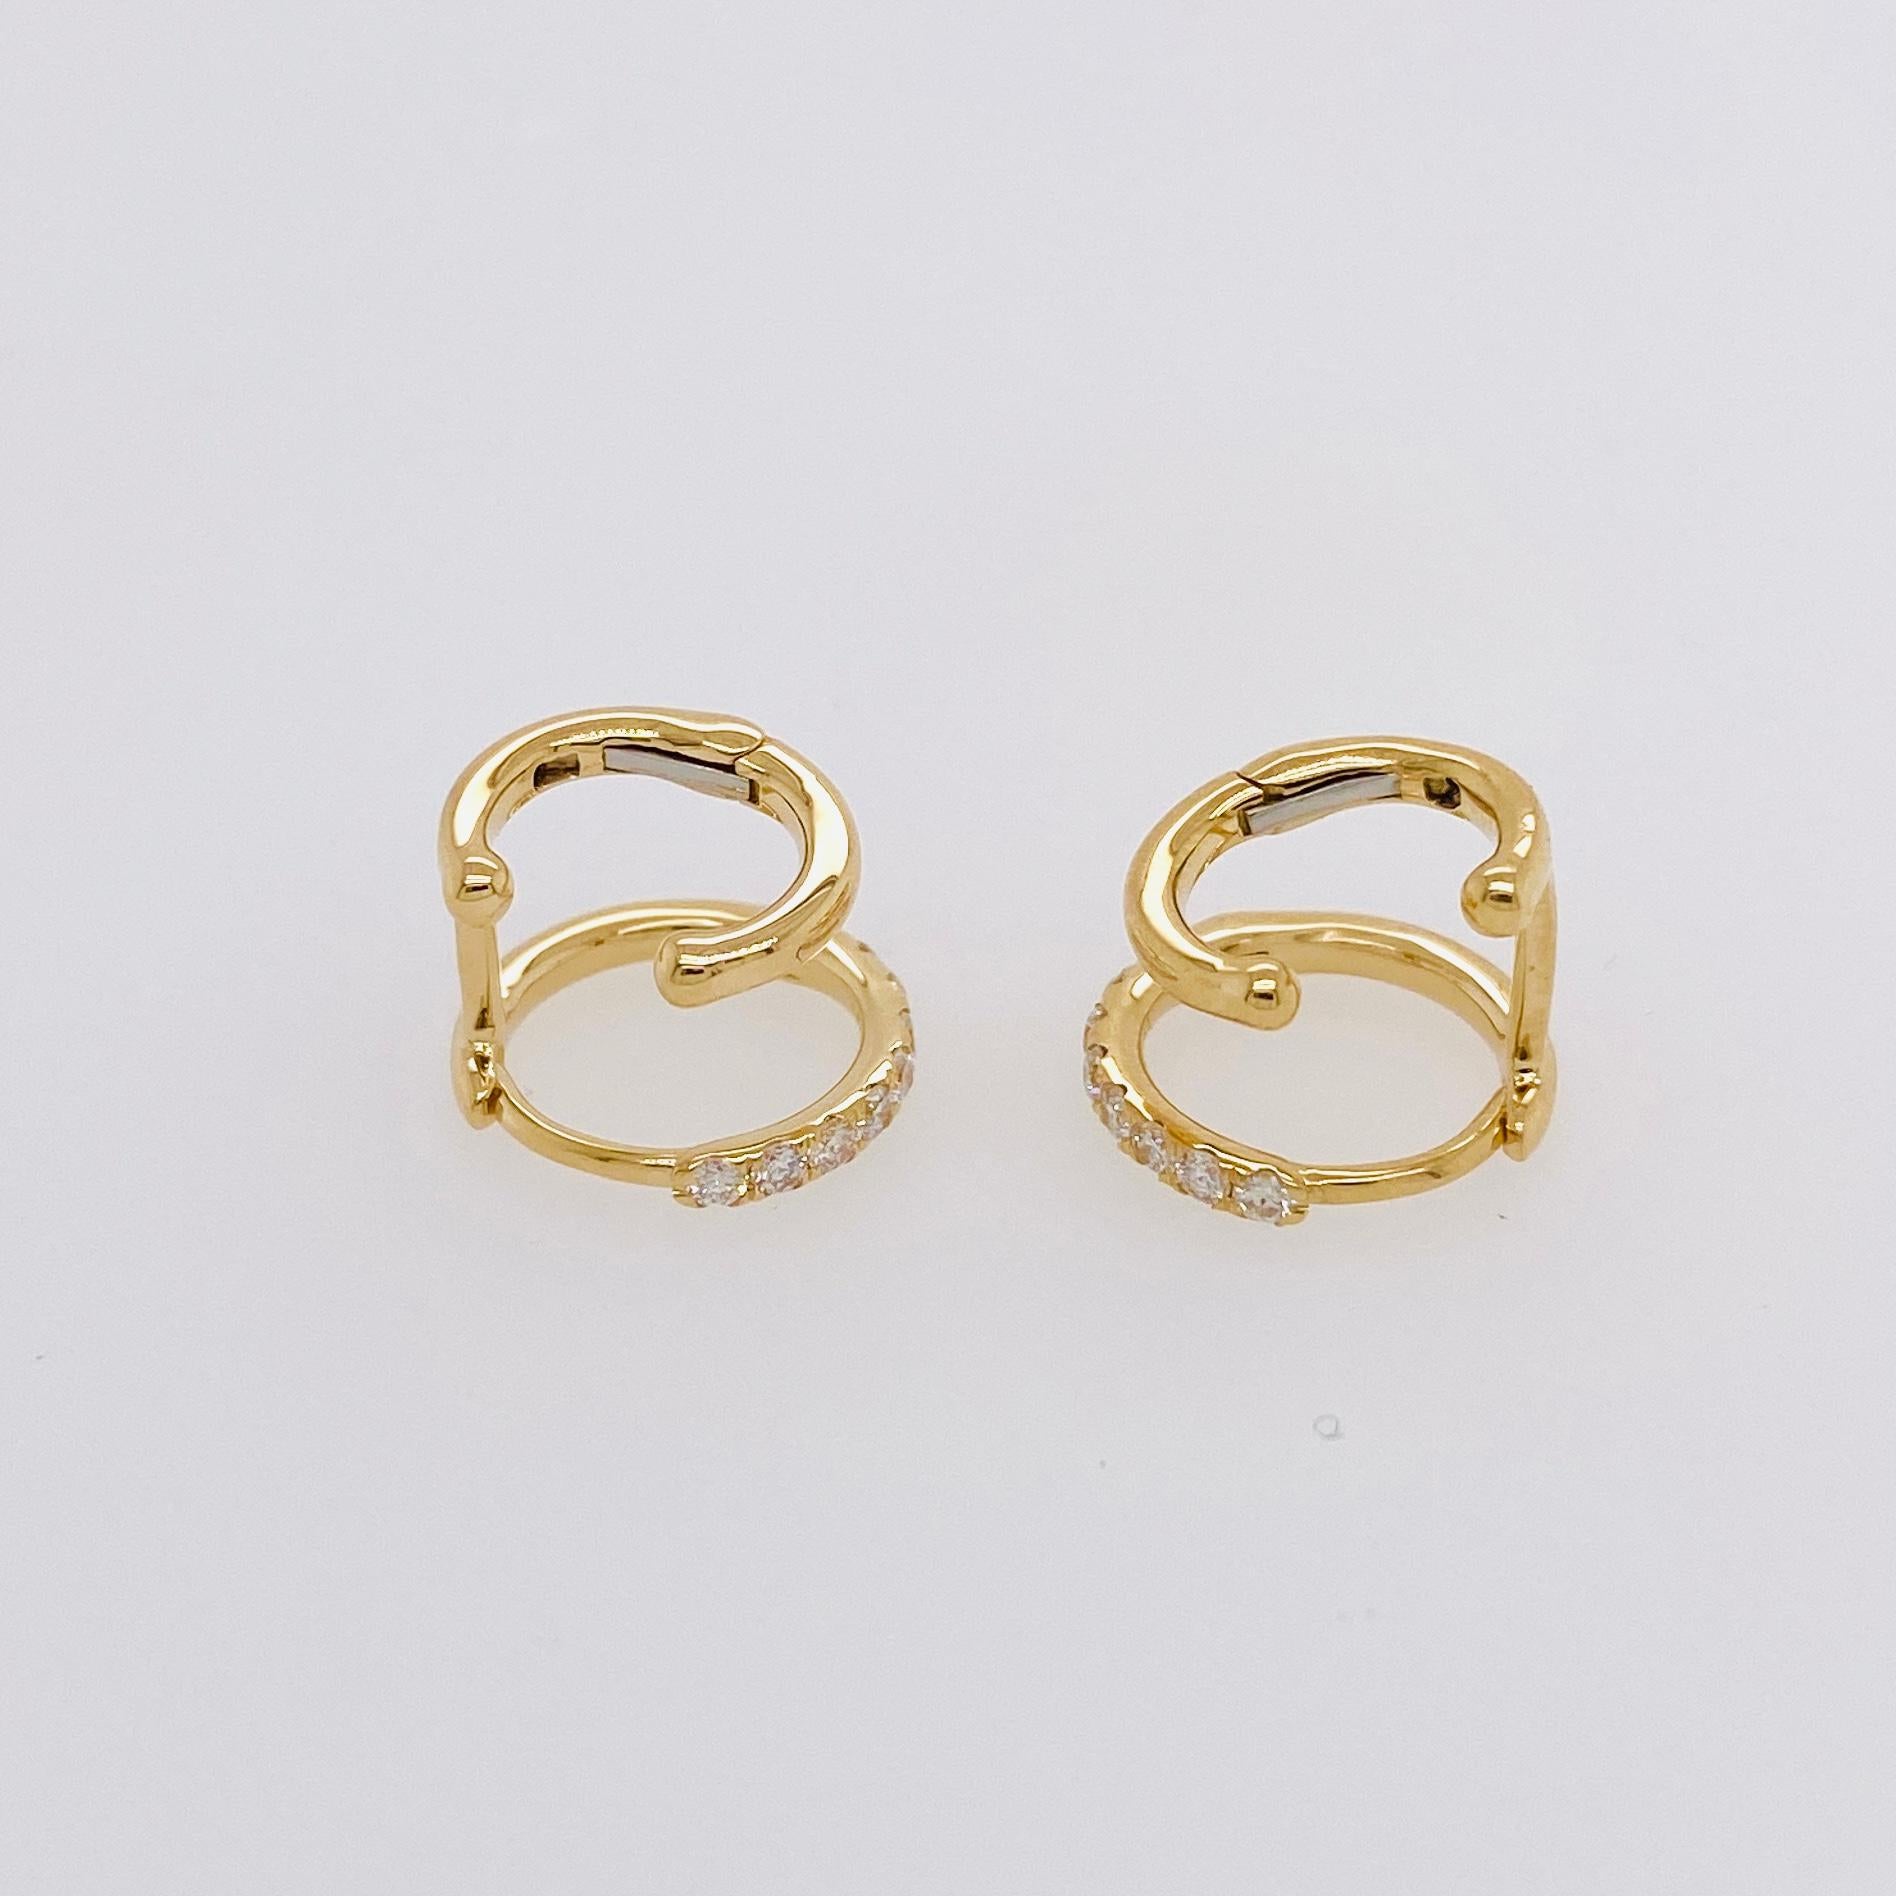 This double huggie earring looks like you have two piercings and two hoops on. The multi earring trend is here and with this earring you can just have one piercing and it looks like you have two! The earring has one hoop on each pair that is